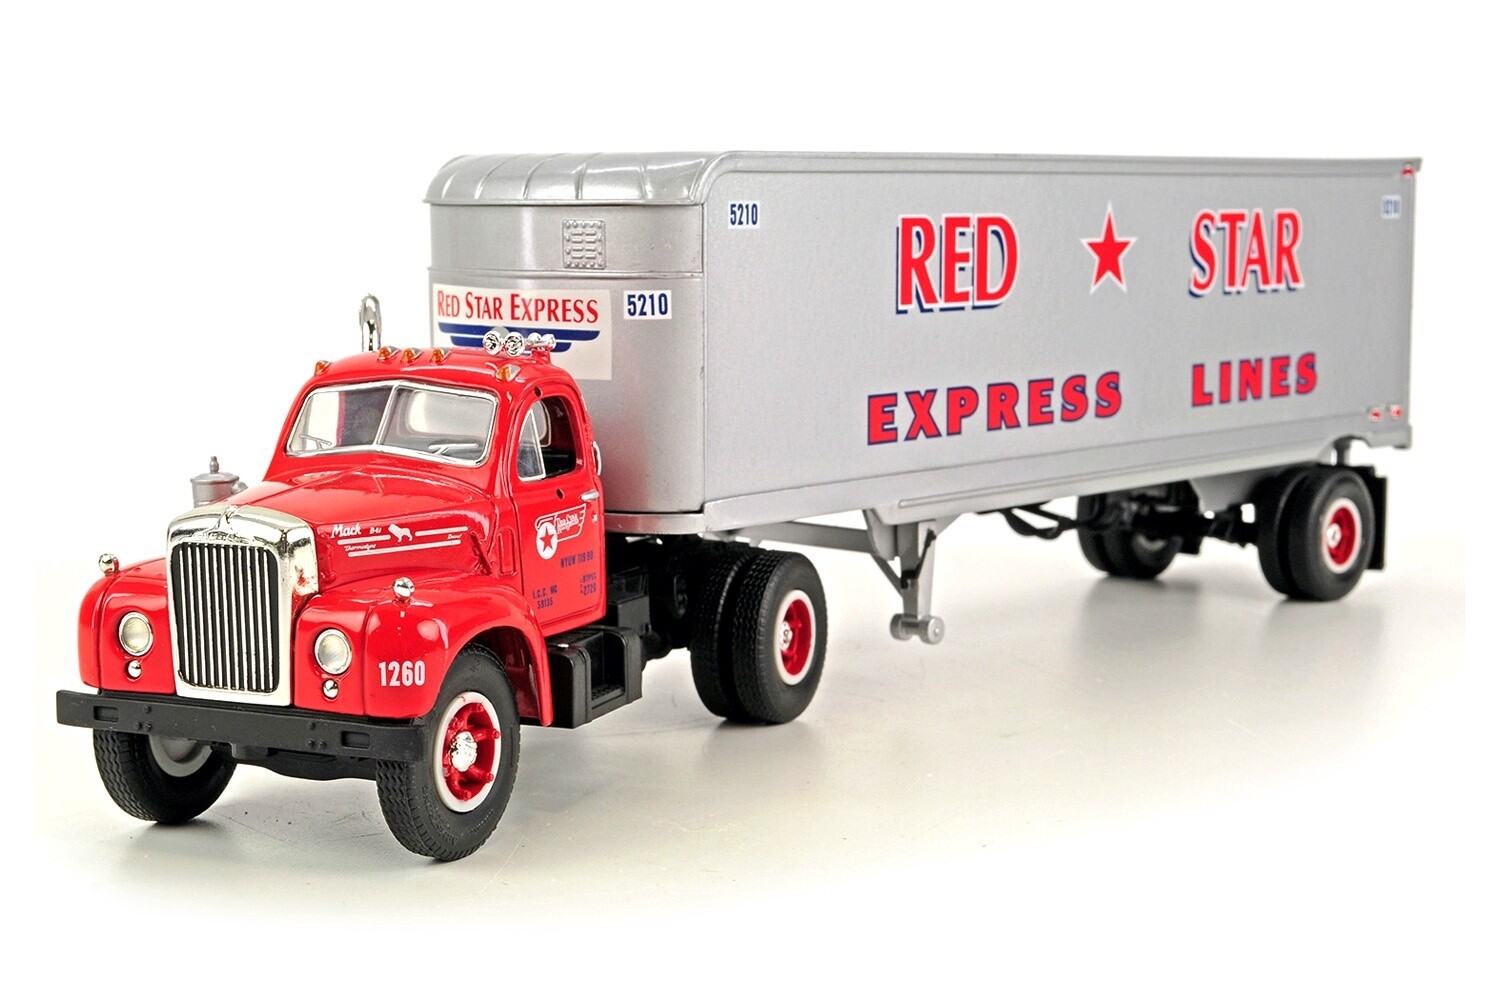 Mack B-61 Tractor Trailer - Red Star Express - 1:34